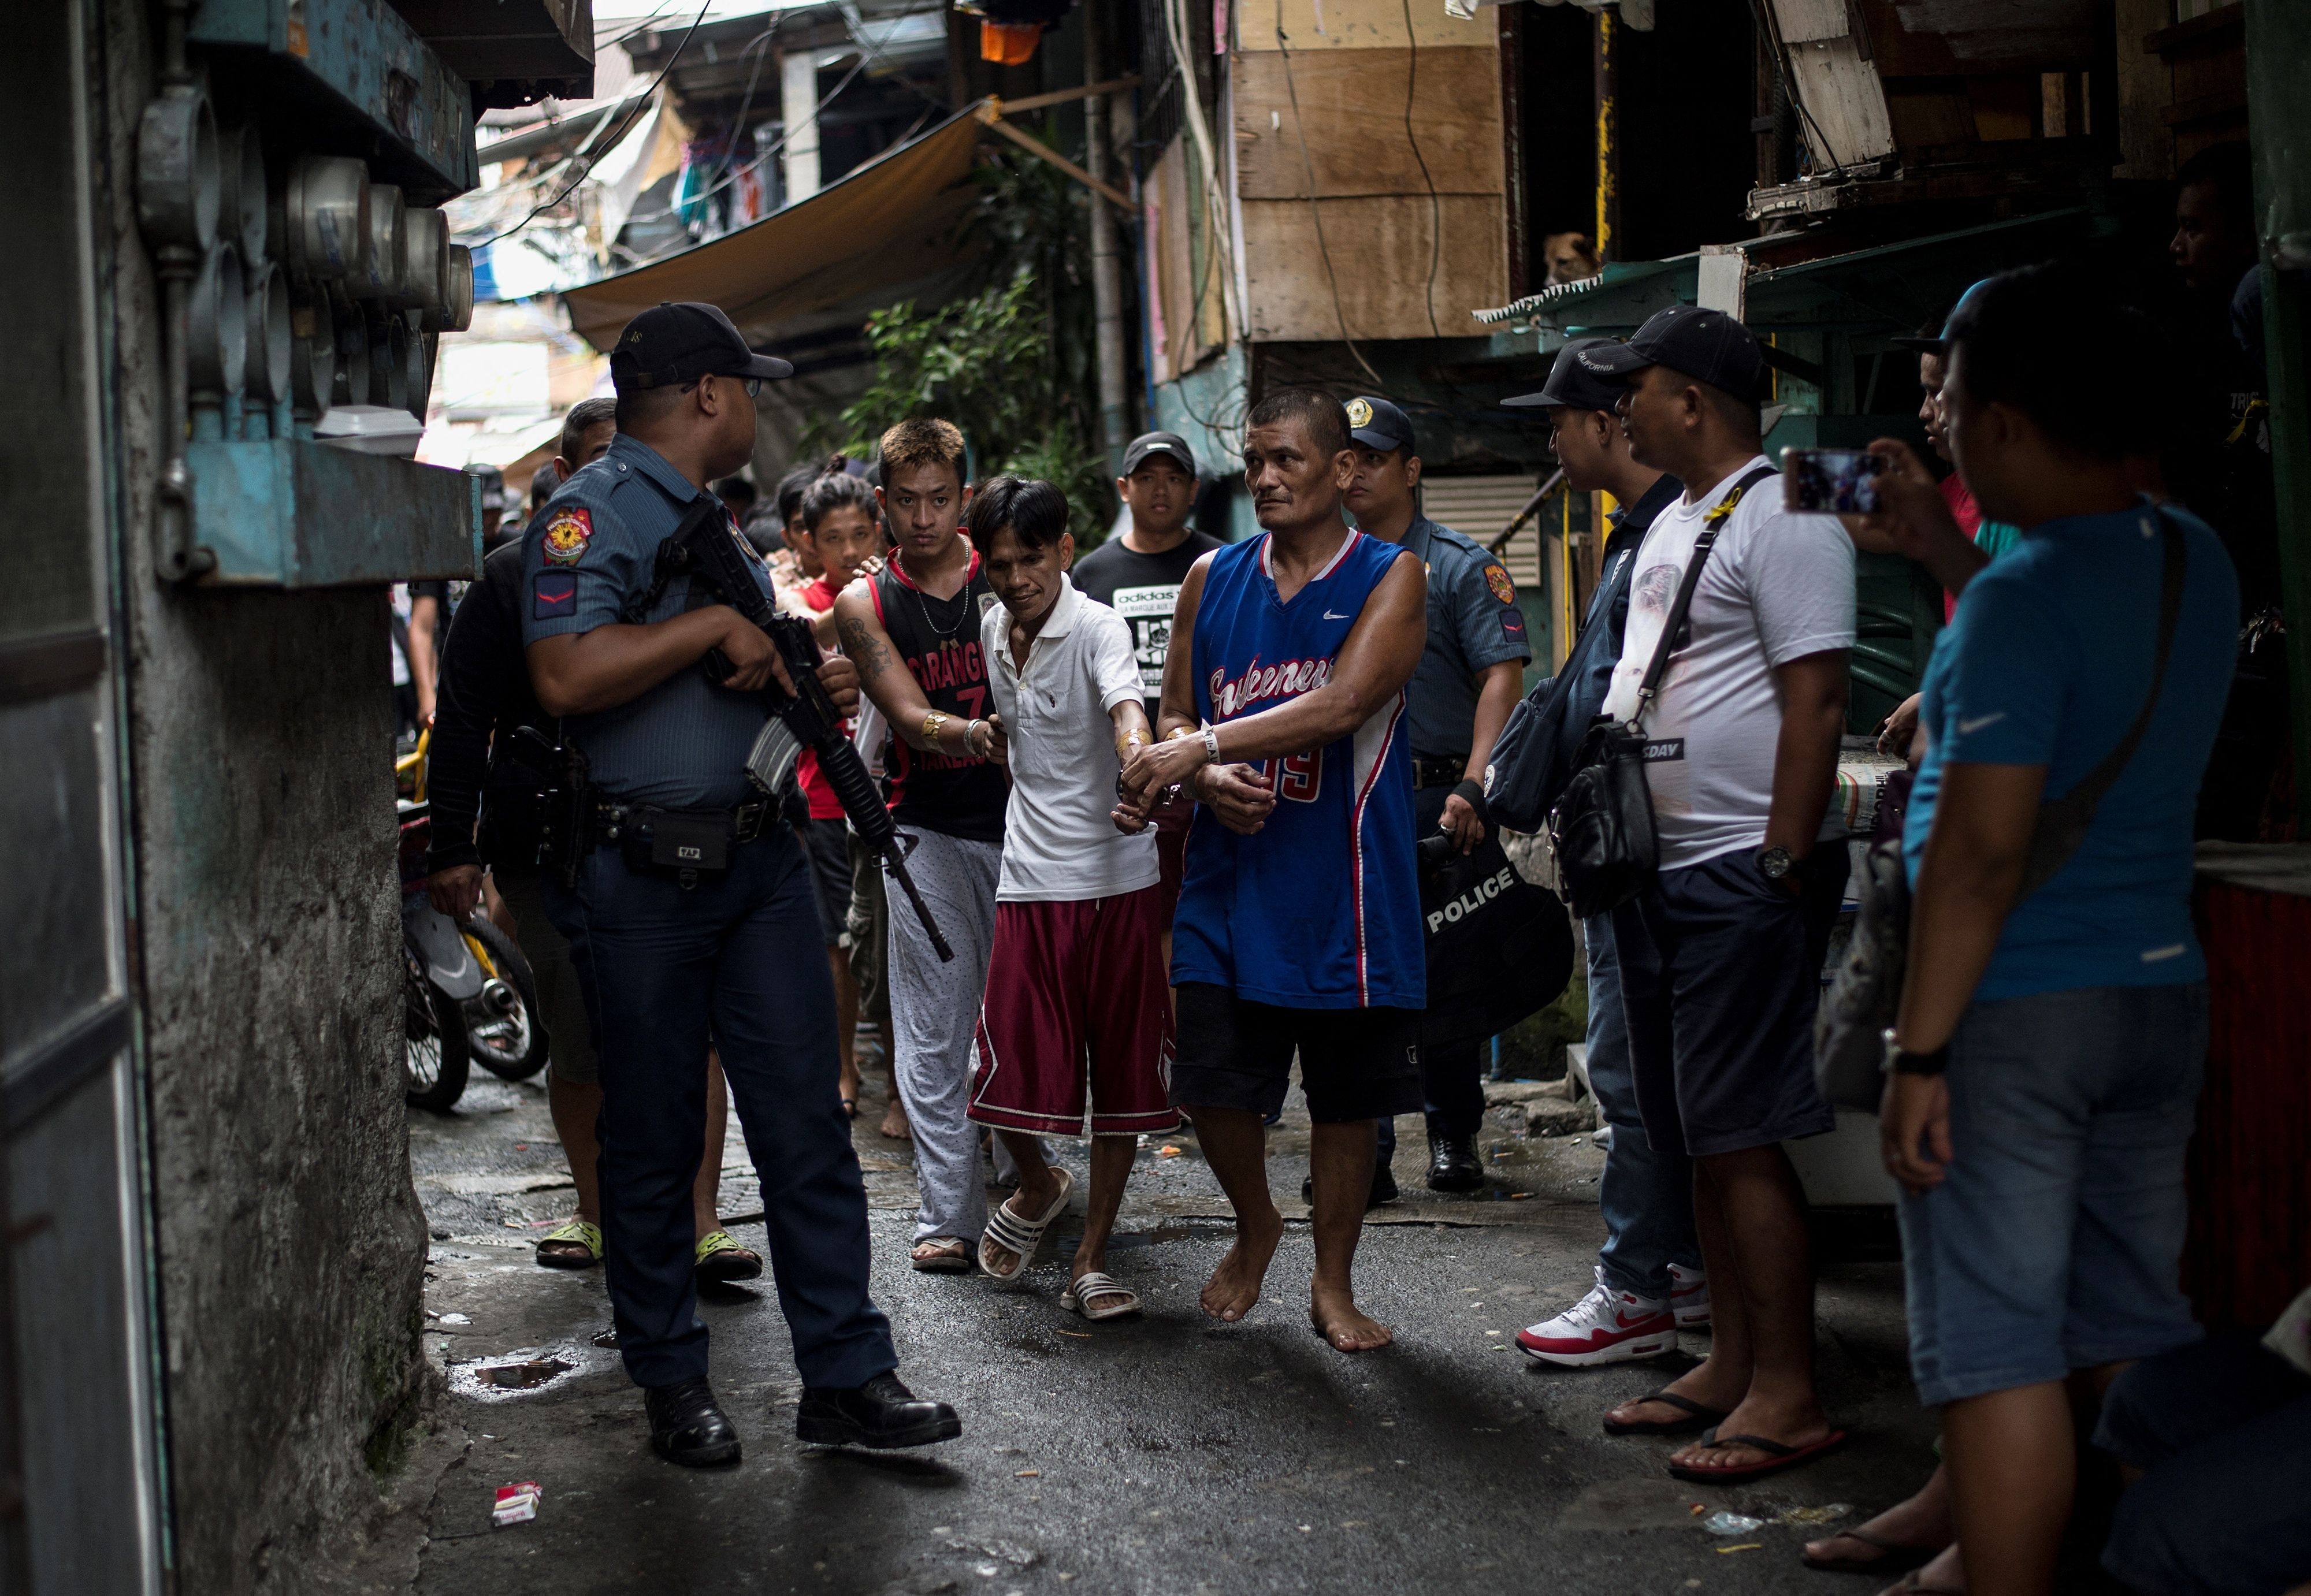 Men are rounded up after police officers conduct a large-scale anti-drug raid at a slum community in Manila on July 20, 2017. Photo: AFP